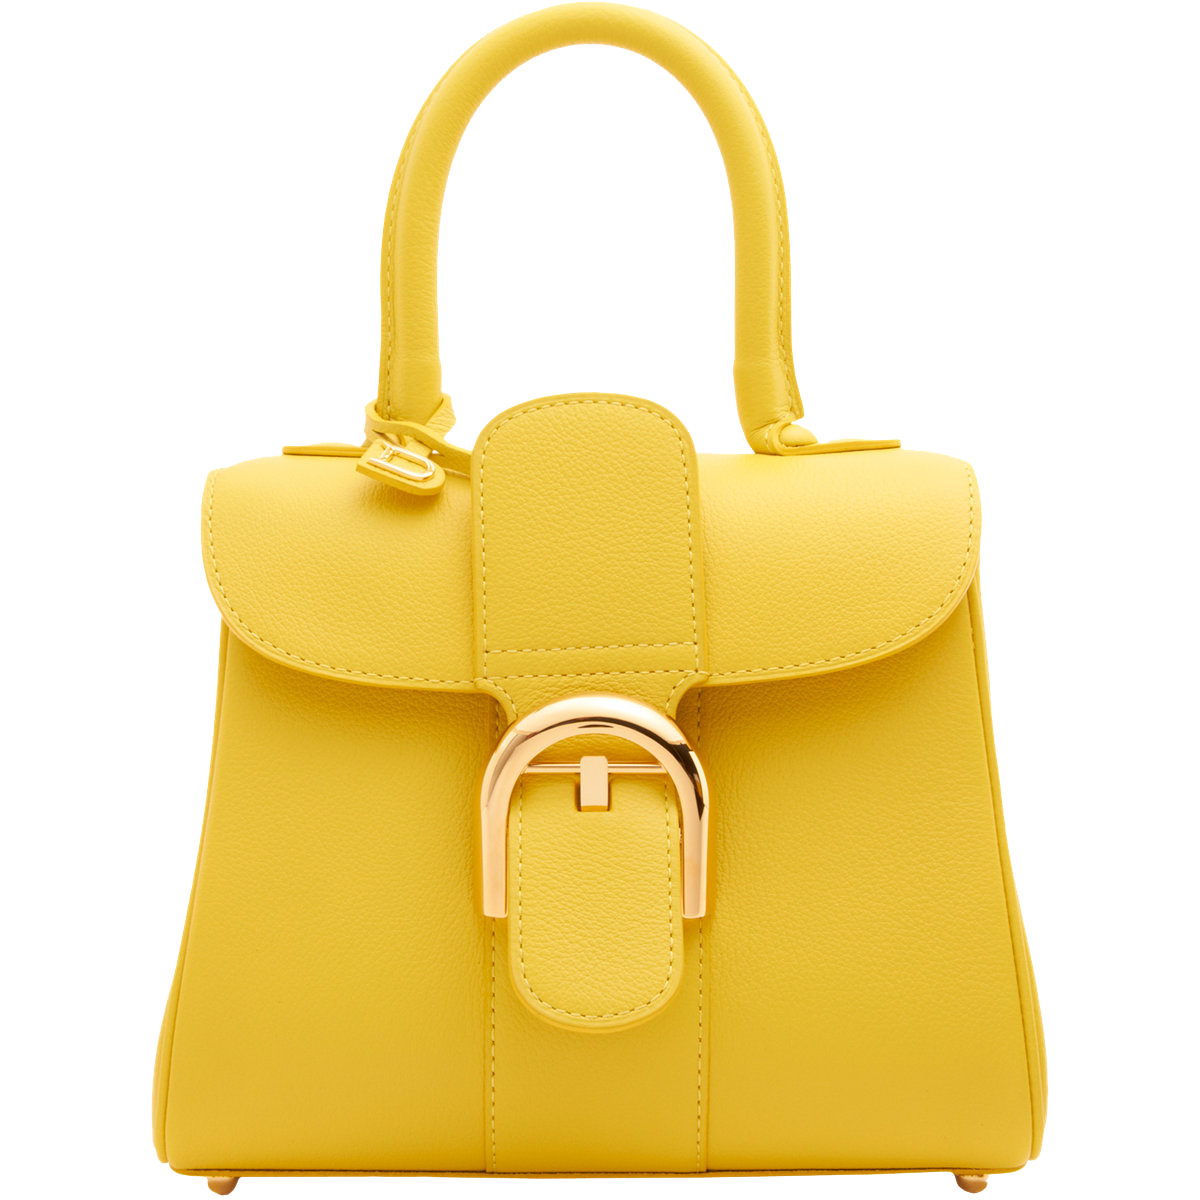 Purse PNG HD Image - PNG All